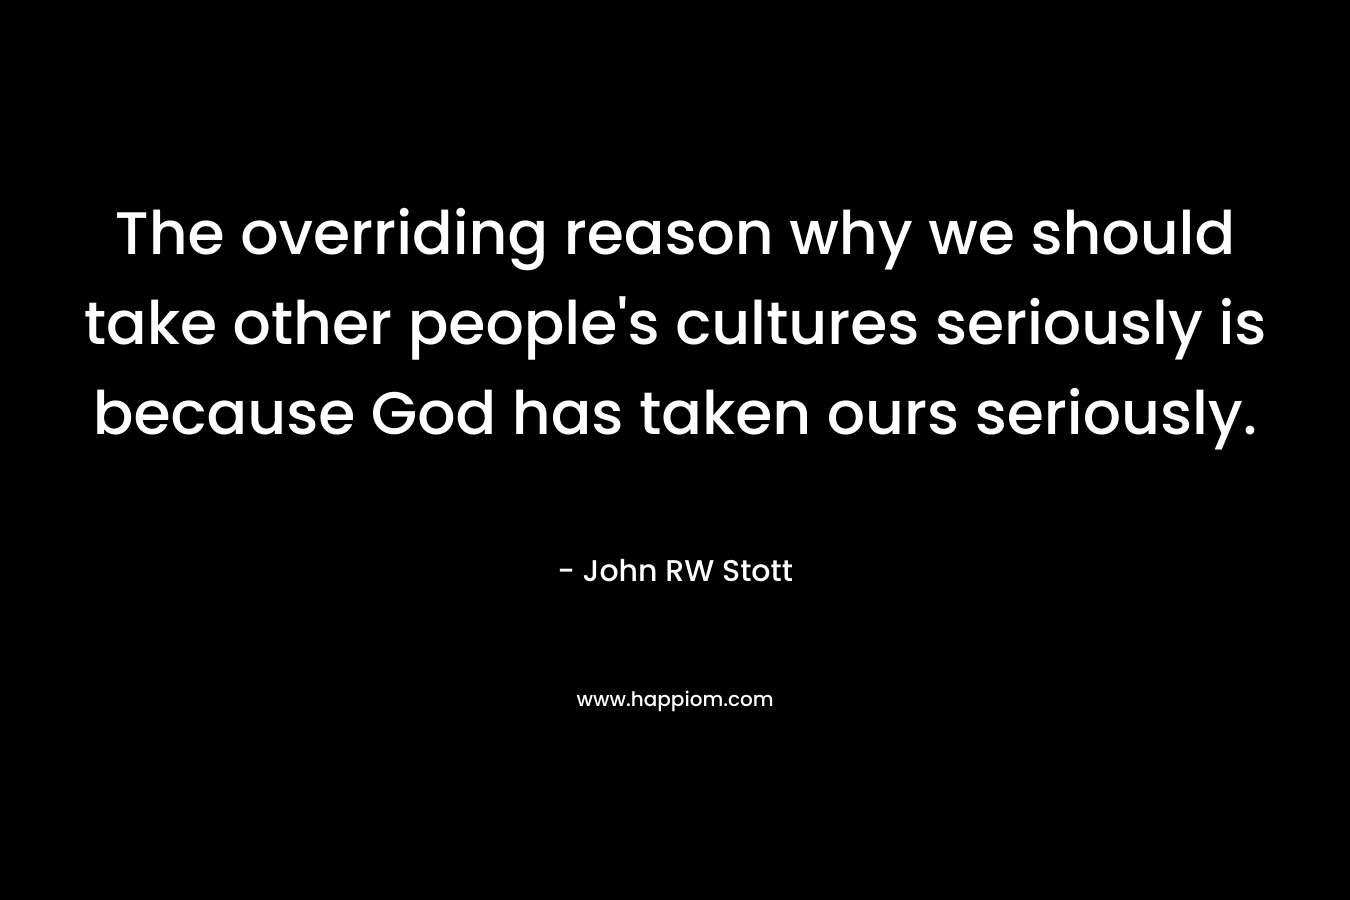 The overriding reason why we should take other people’s cultures seriously is because God has taken ours seriously. – John RW Stott